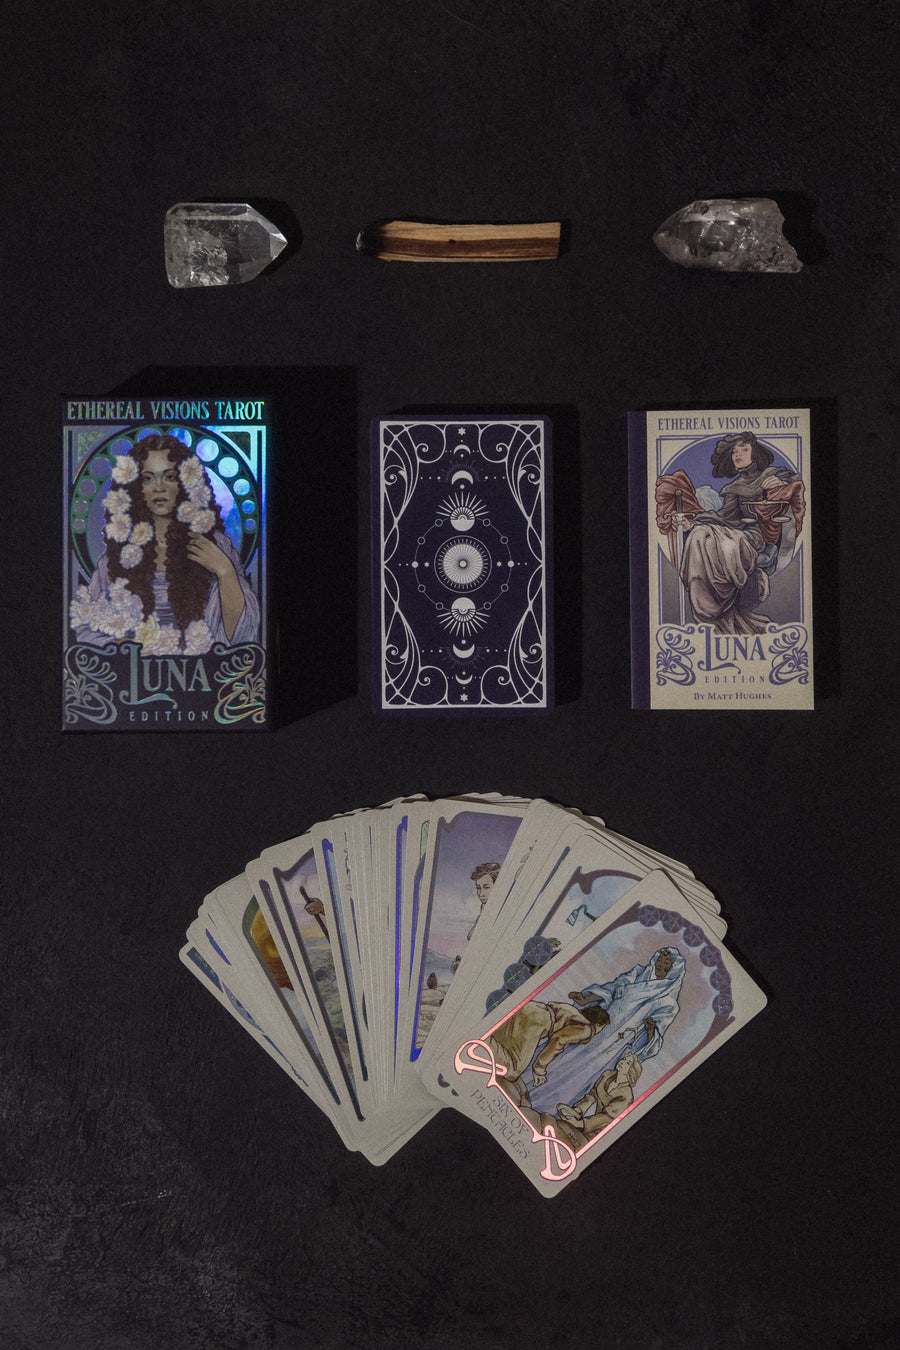 US Games System Objects Gold / FINAL SALE Ethereal Visions Tarot Deck .:. Luna Addition